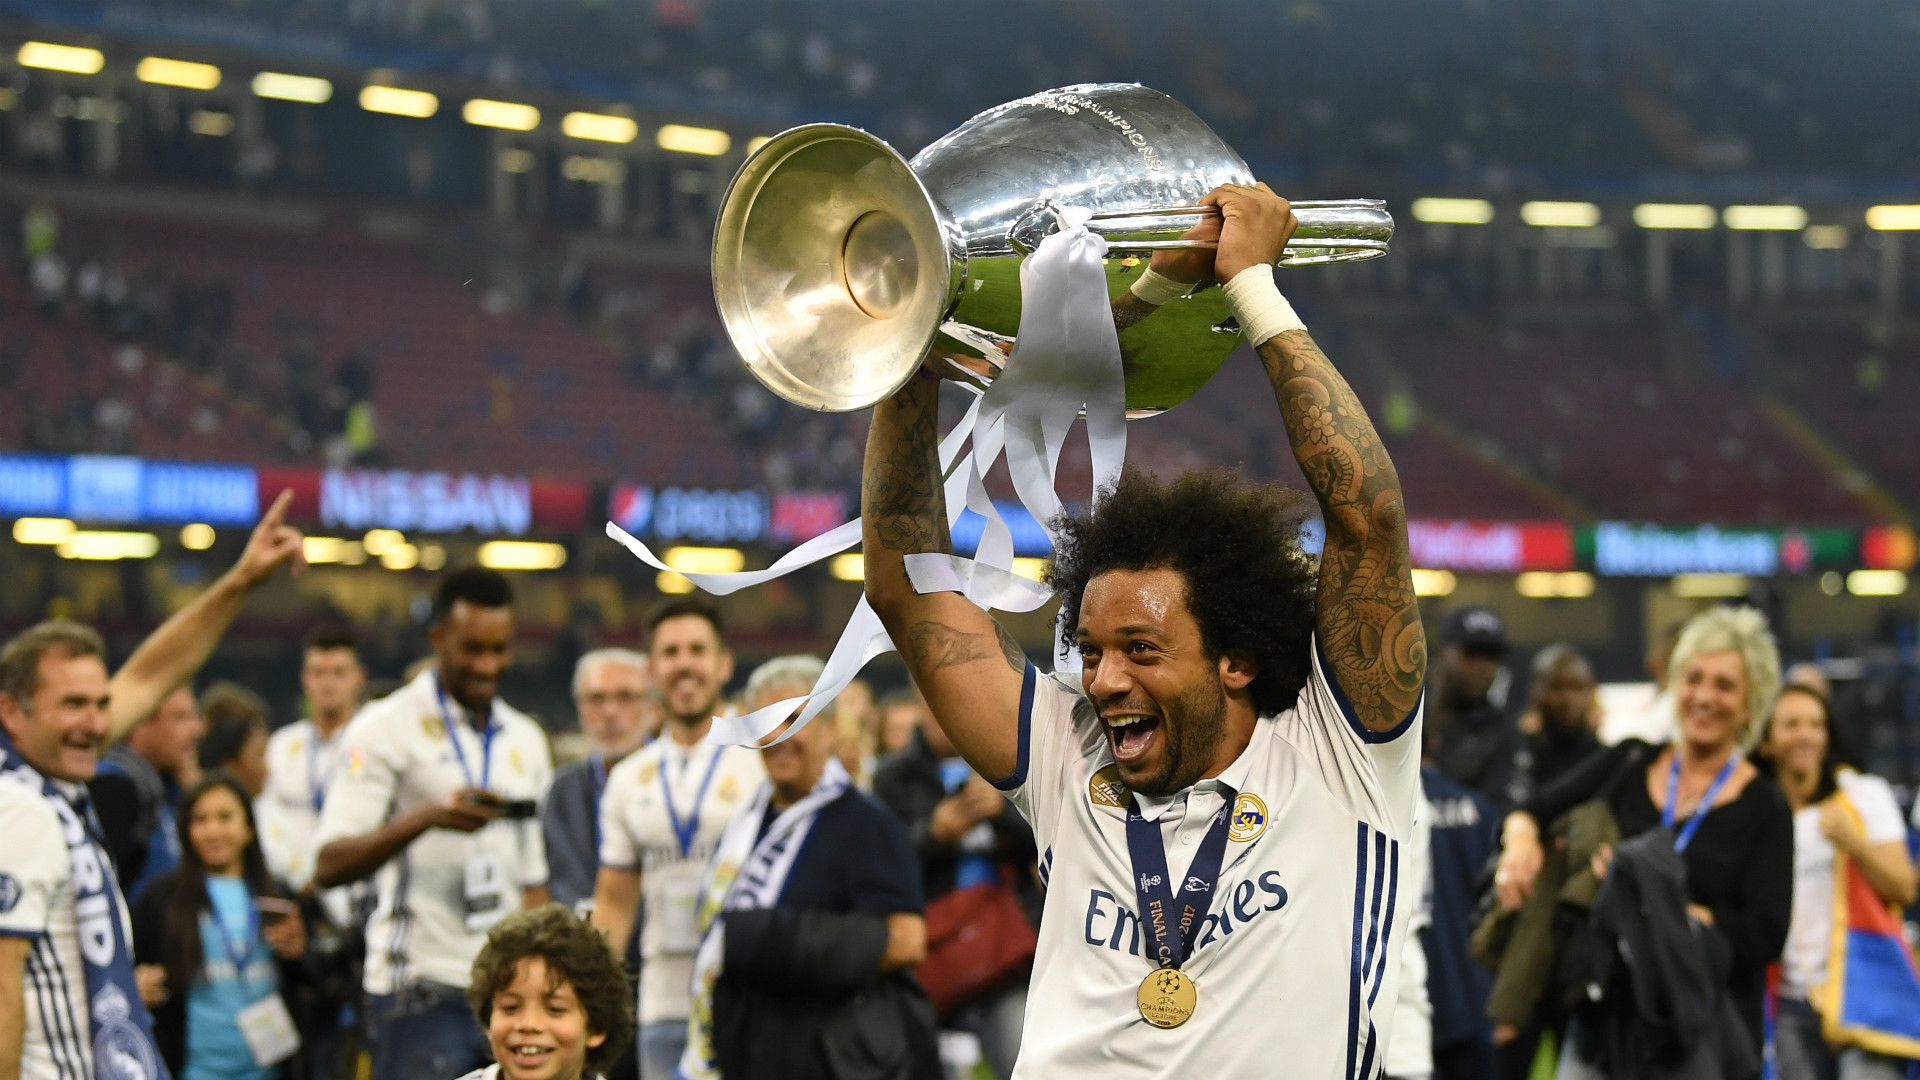 Marcelo taking every opportunity to 